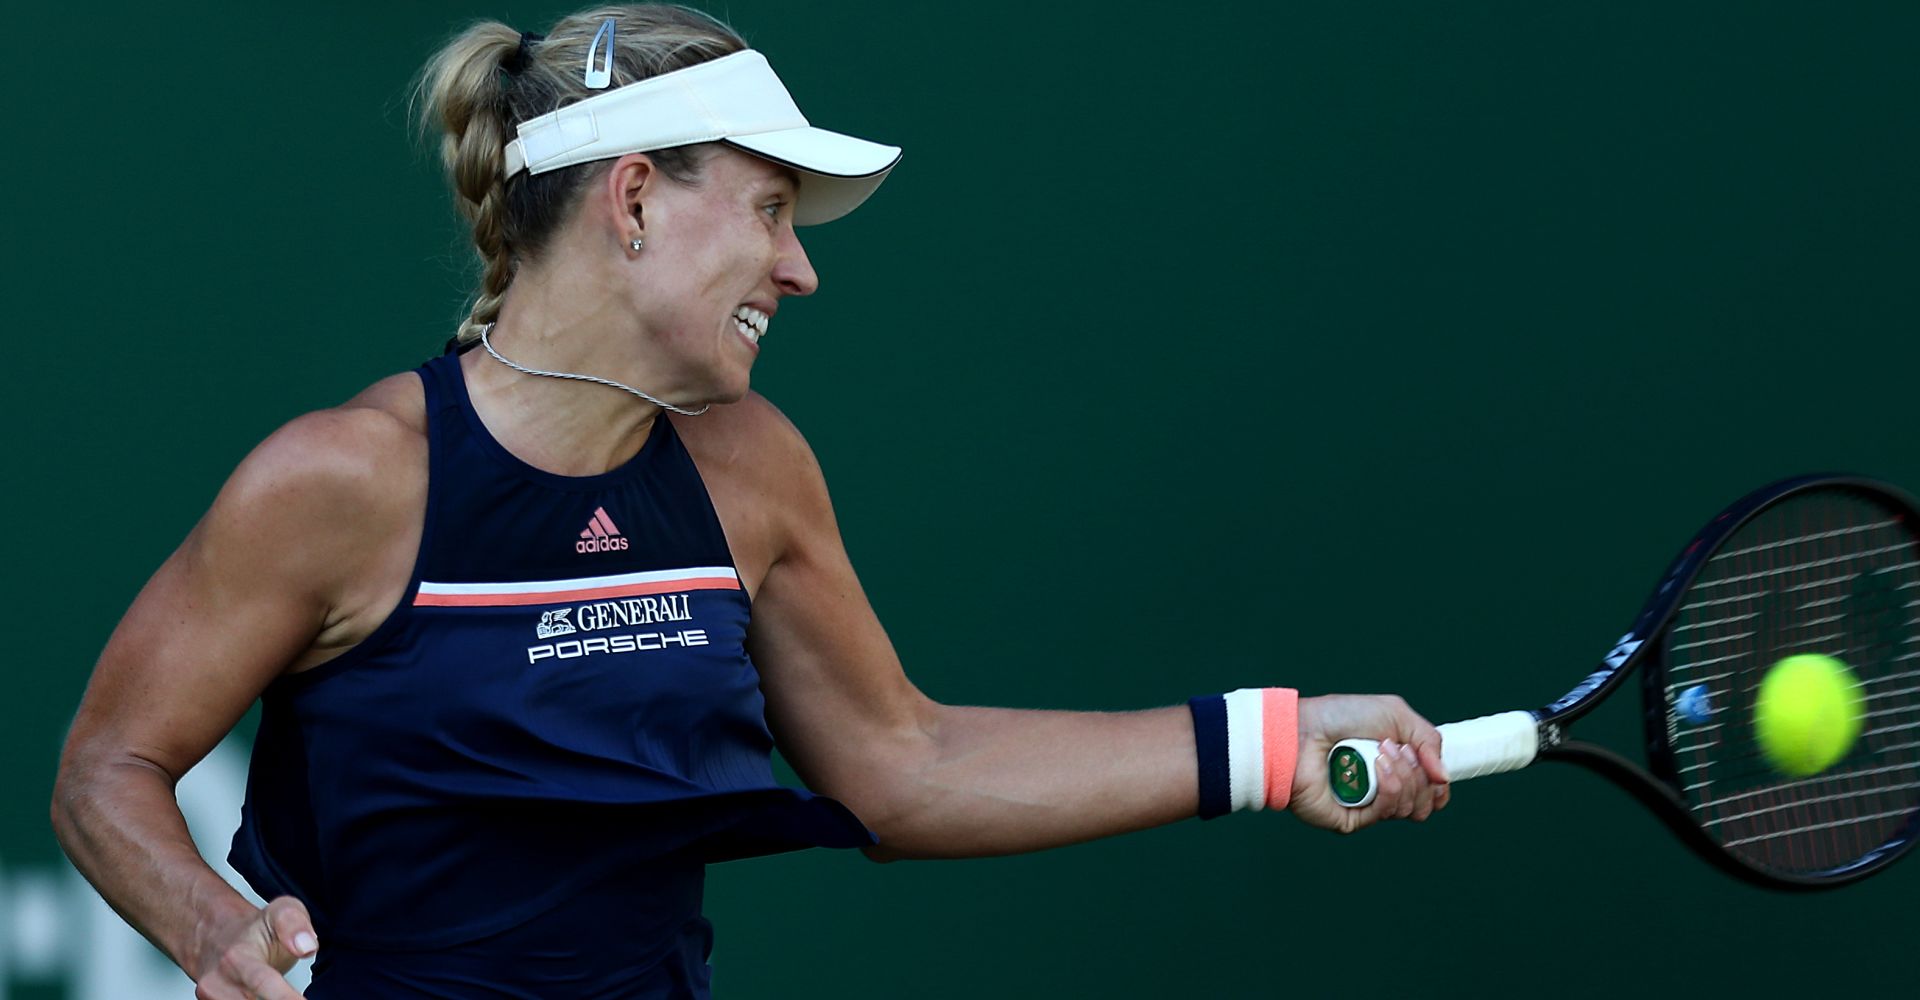 Wimbedon 2019 Ladies outright betting odds